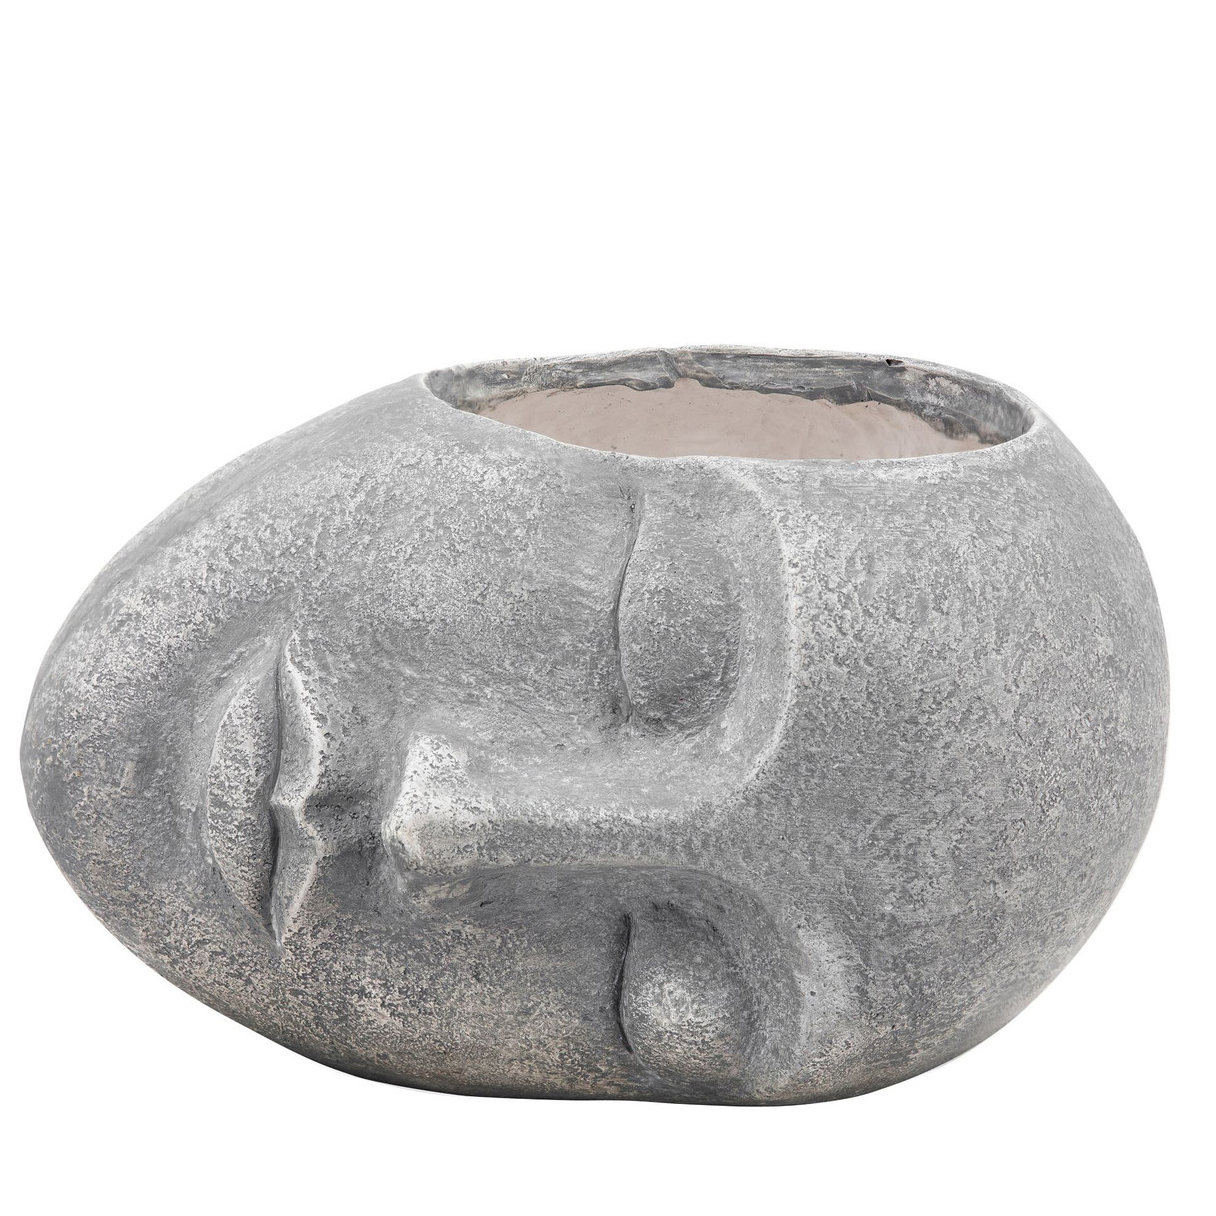 stone look resin face planter laying on side